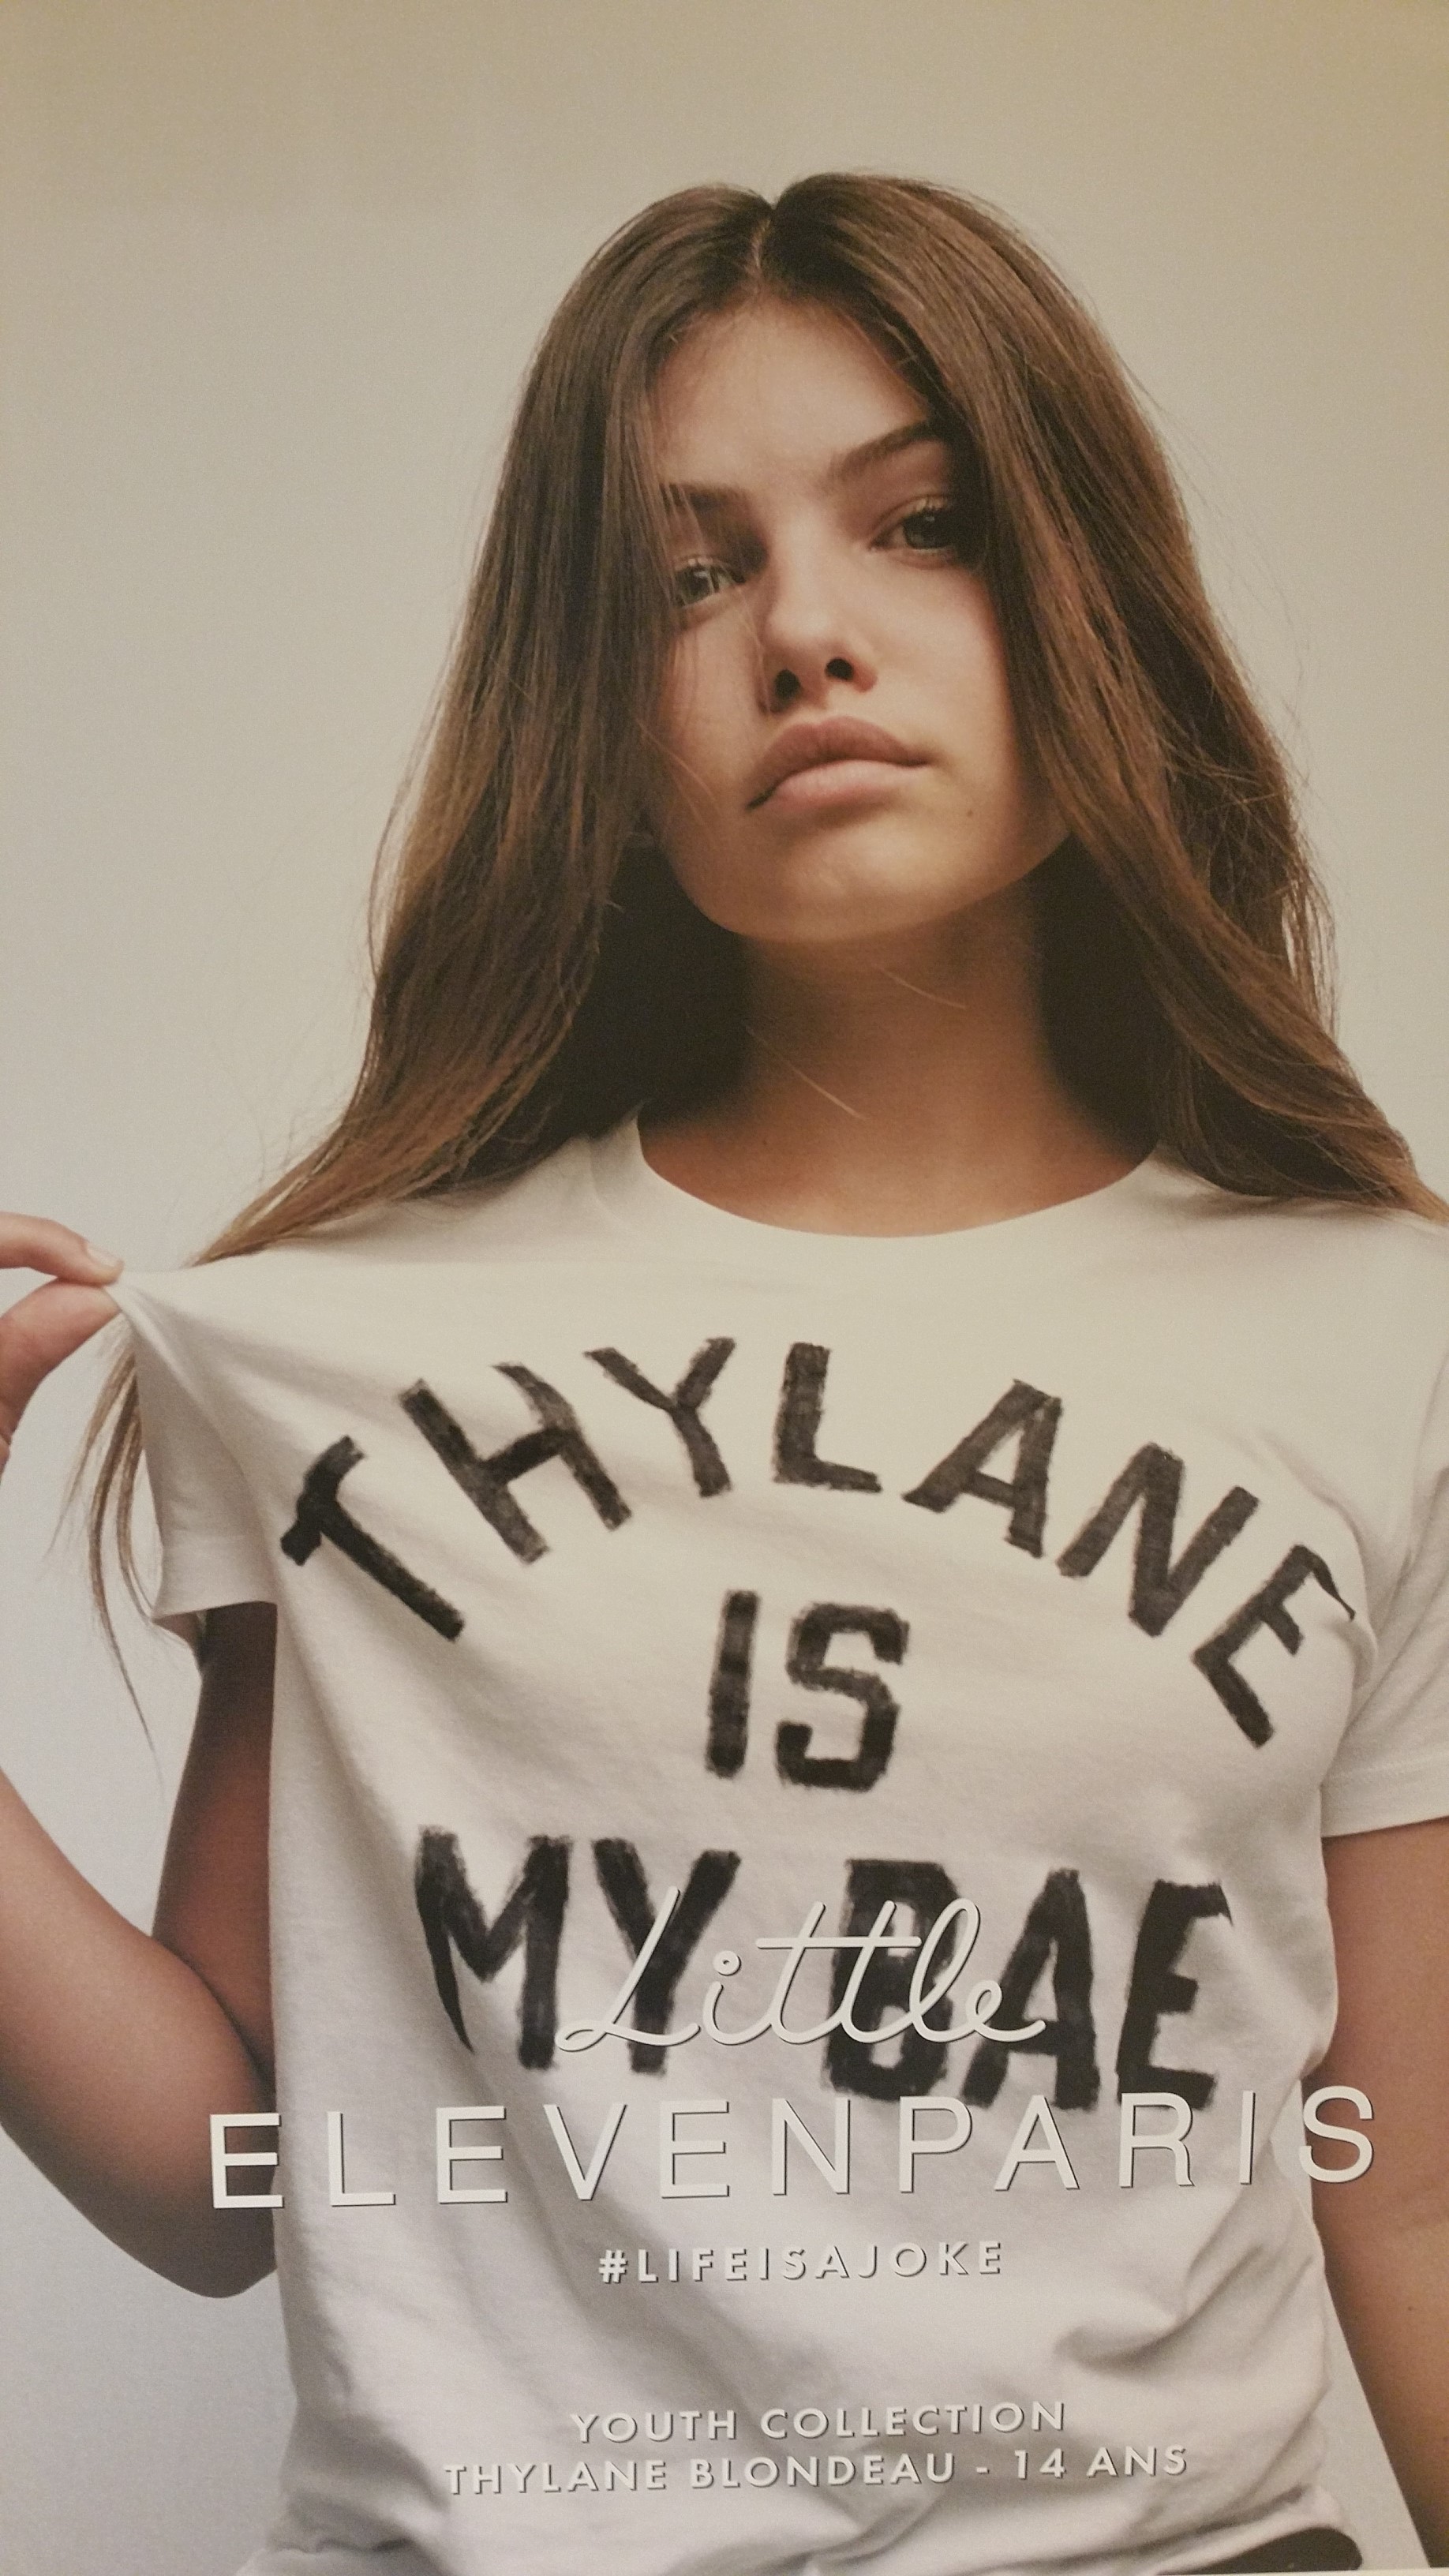 youth collection by thylane blondeau pour eleven paris